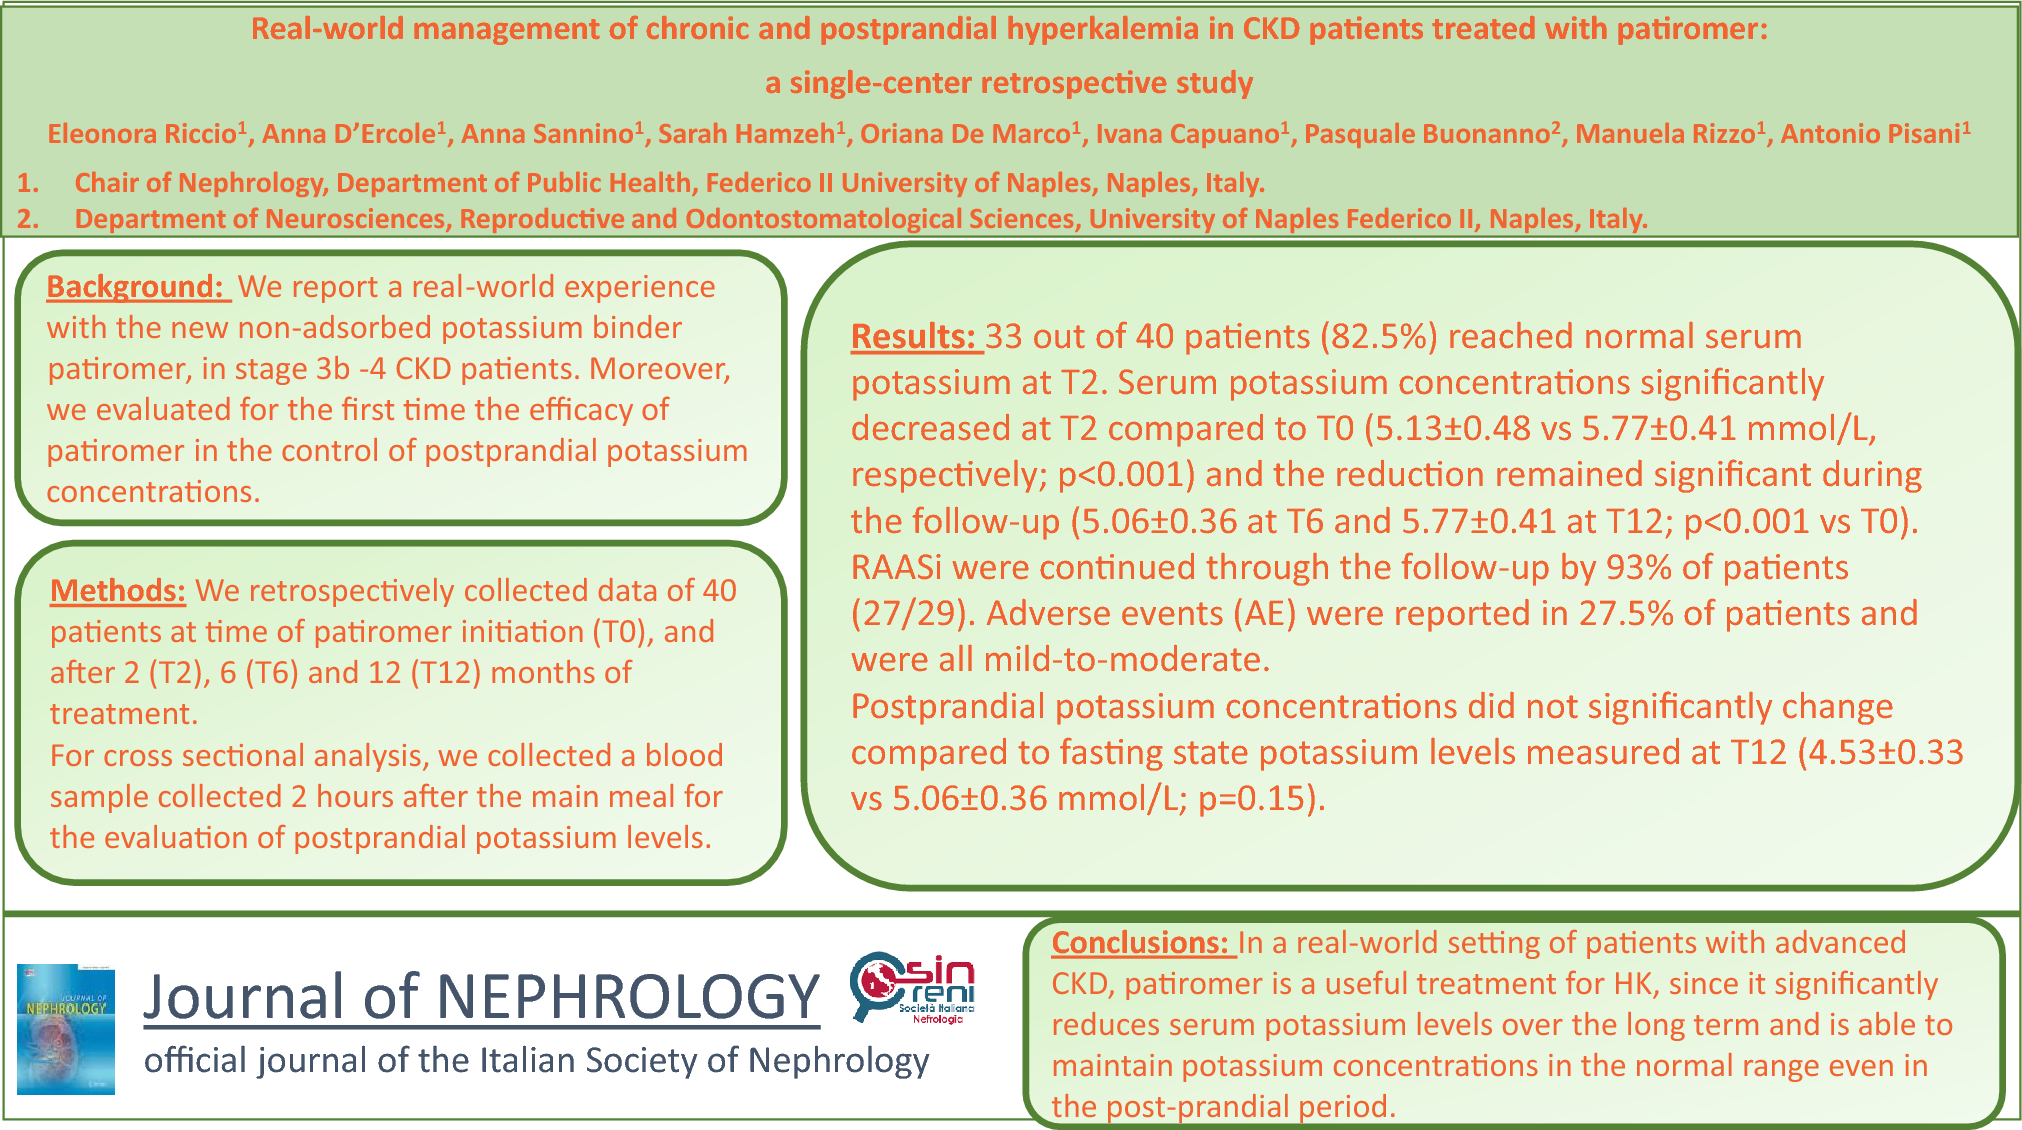 Real-world management of chronic and postprandial hyperkalemia in CKD patients treated with patiromer: a single-center retrospective study